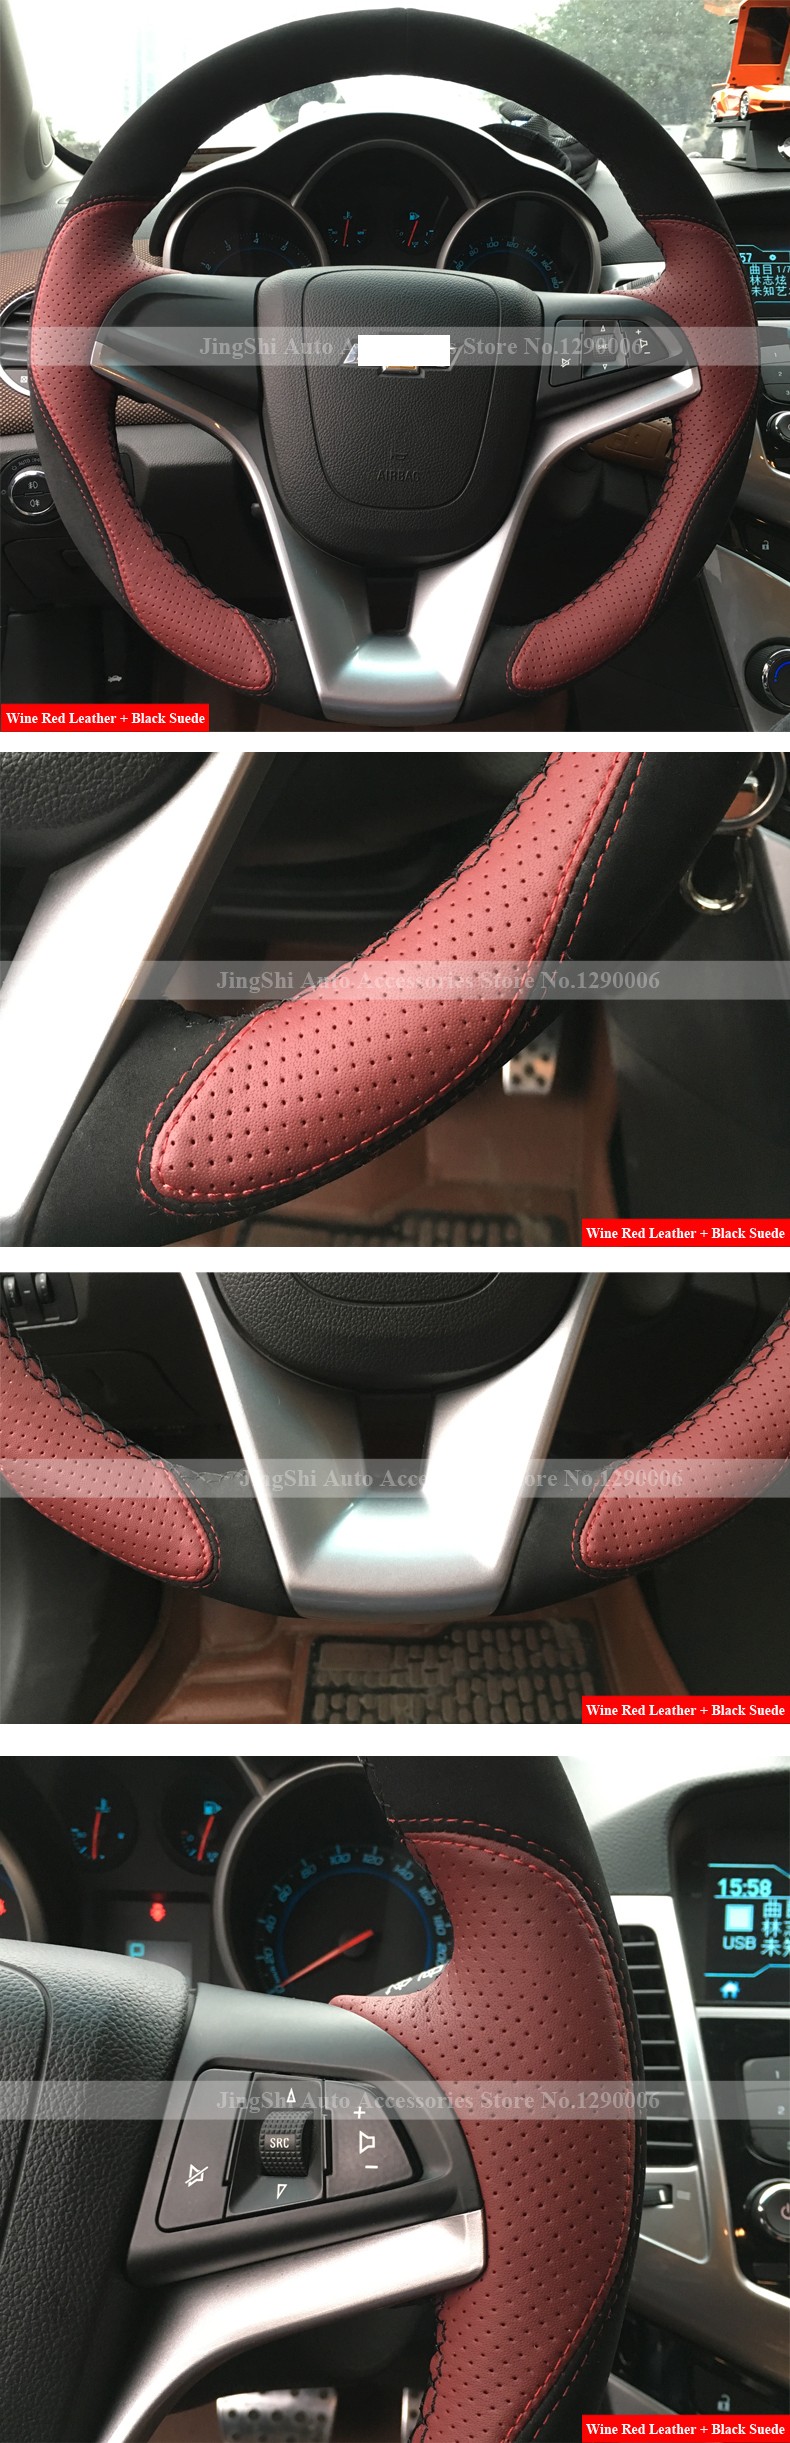 Wine Red Leather Black Suede Steering Wheel Cover for Chevrolet Cruze Aveo 2011 2012 2013